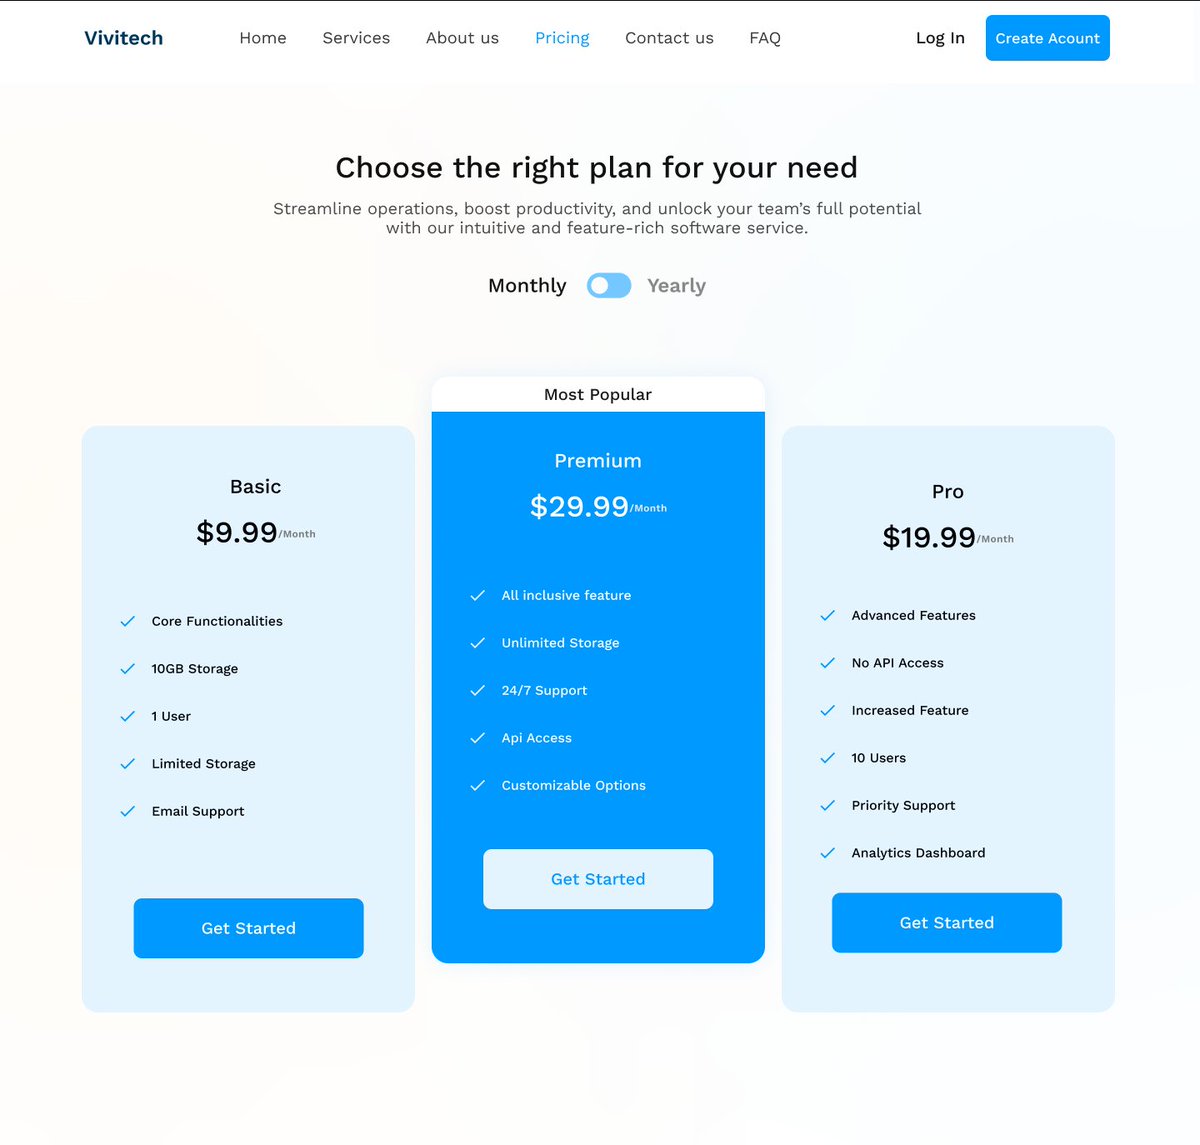 #designsprint #designchallenge 
I Designed a pricing page interface for a software service. 😊

Seeking a UI/UX designer?👨‍💻🧑‍💻 Let's collaborate and create exceptional digital experiences. Reach out now for design excellence! 😊😊

#internship #uidesign
behance.net/oluwalajesutof